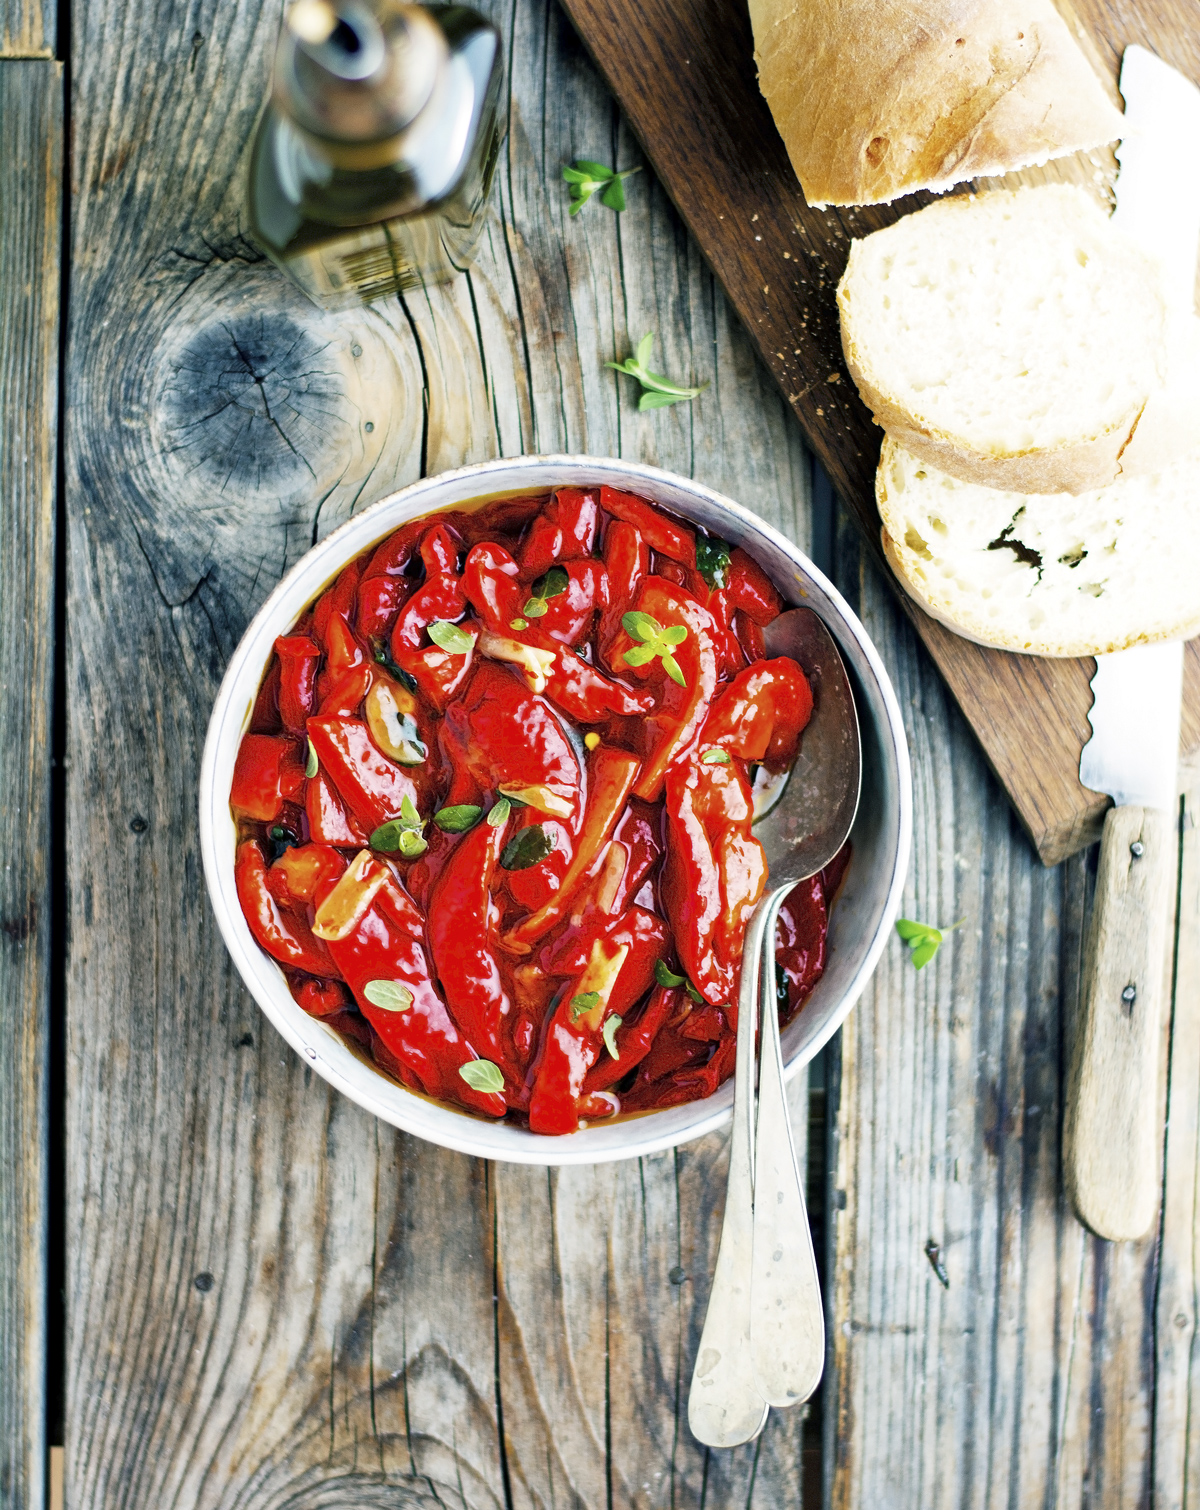 Marinated Red Peppers with Garlic and Oregano